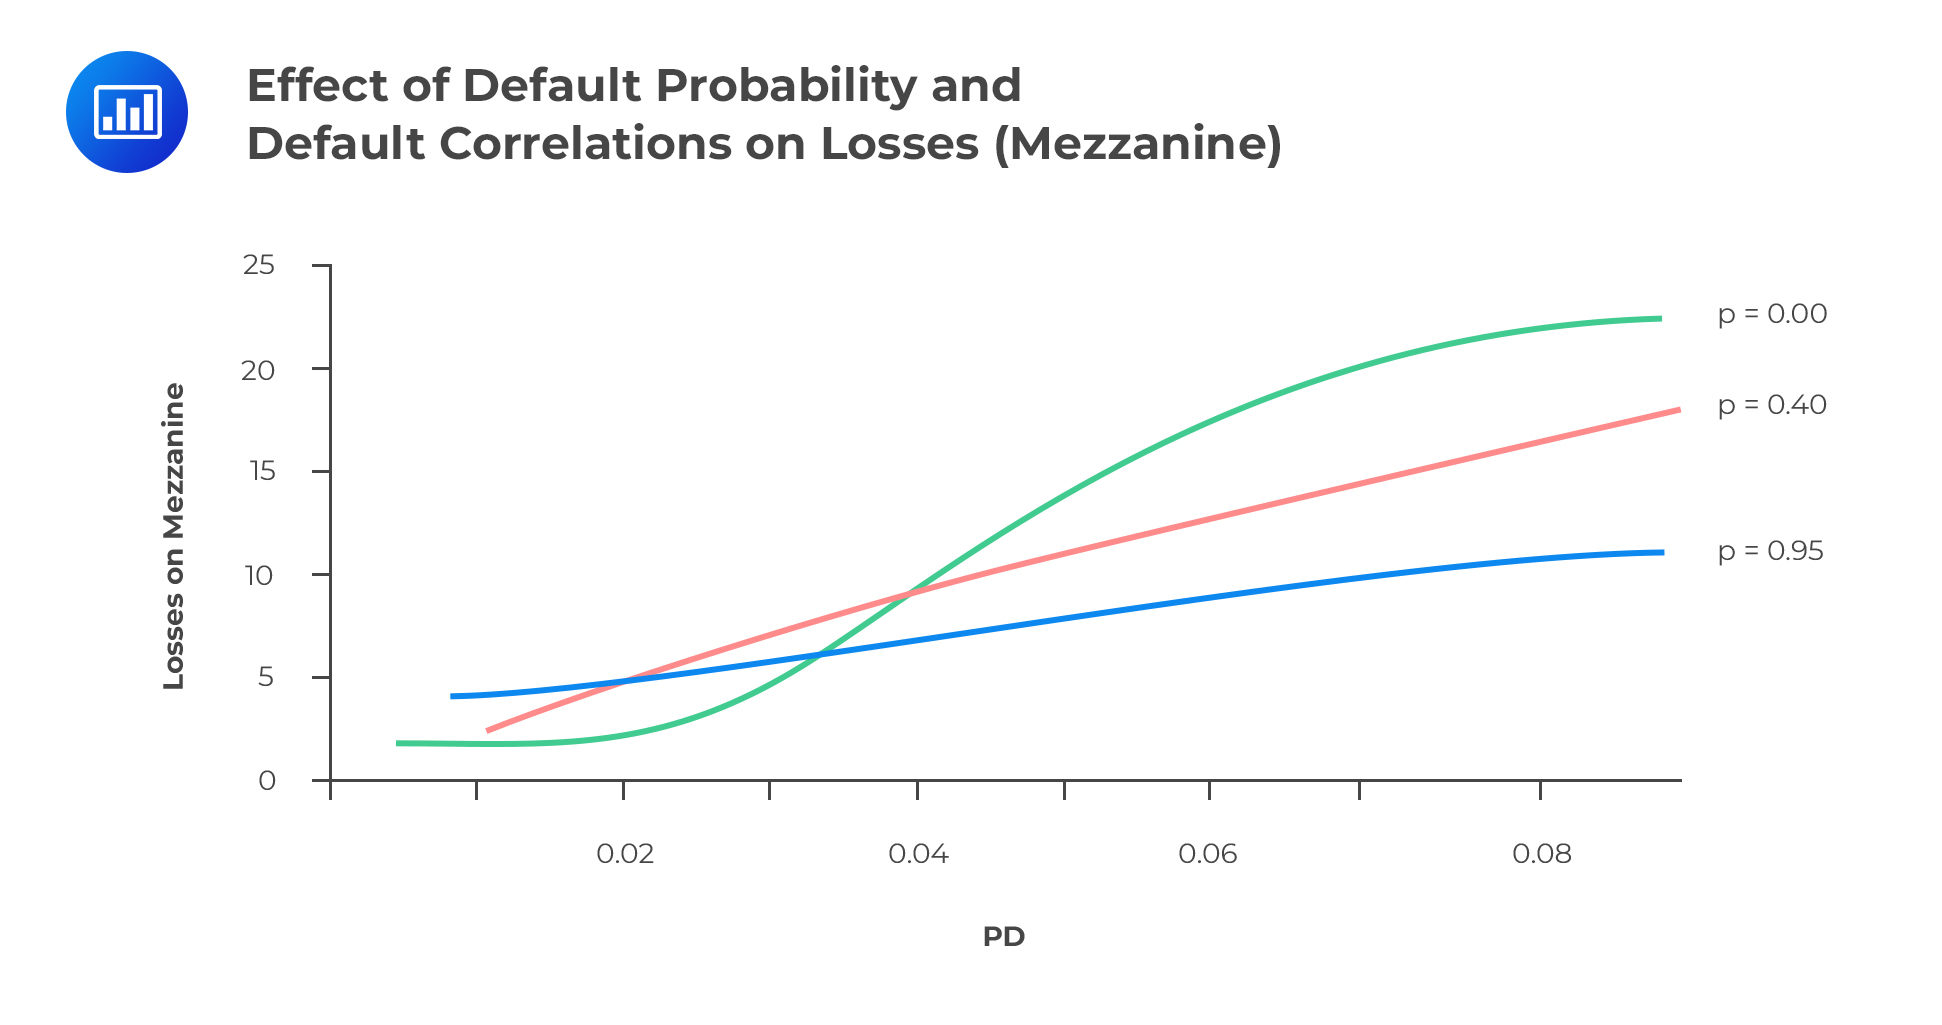 Effect of Default Probability and Default Correlations on Value of Equity